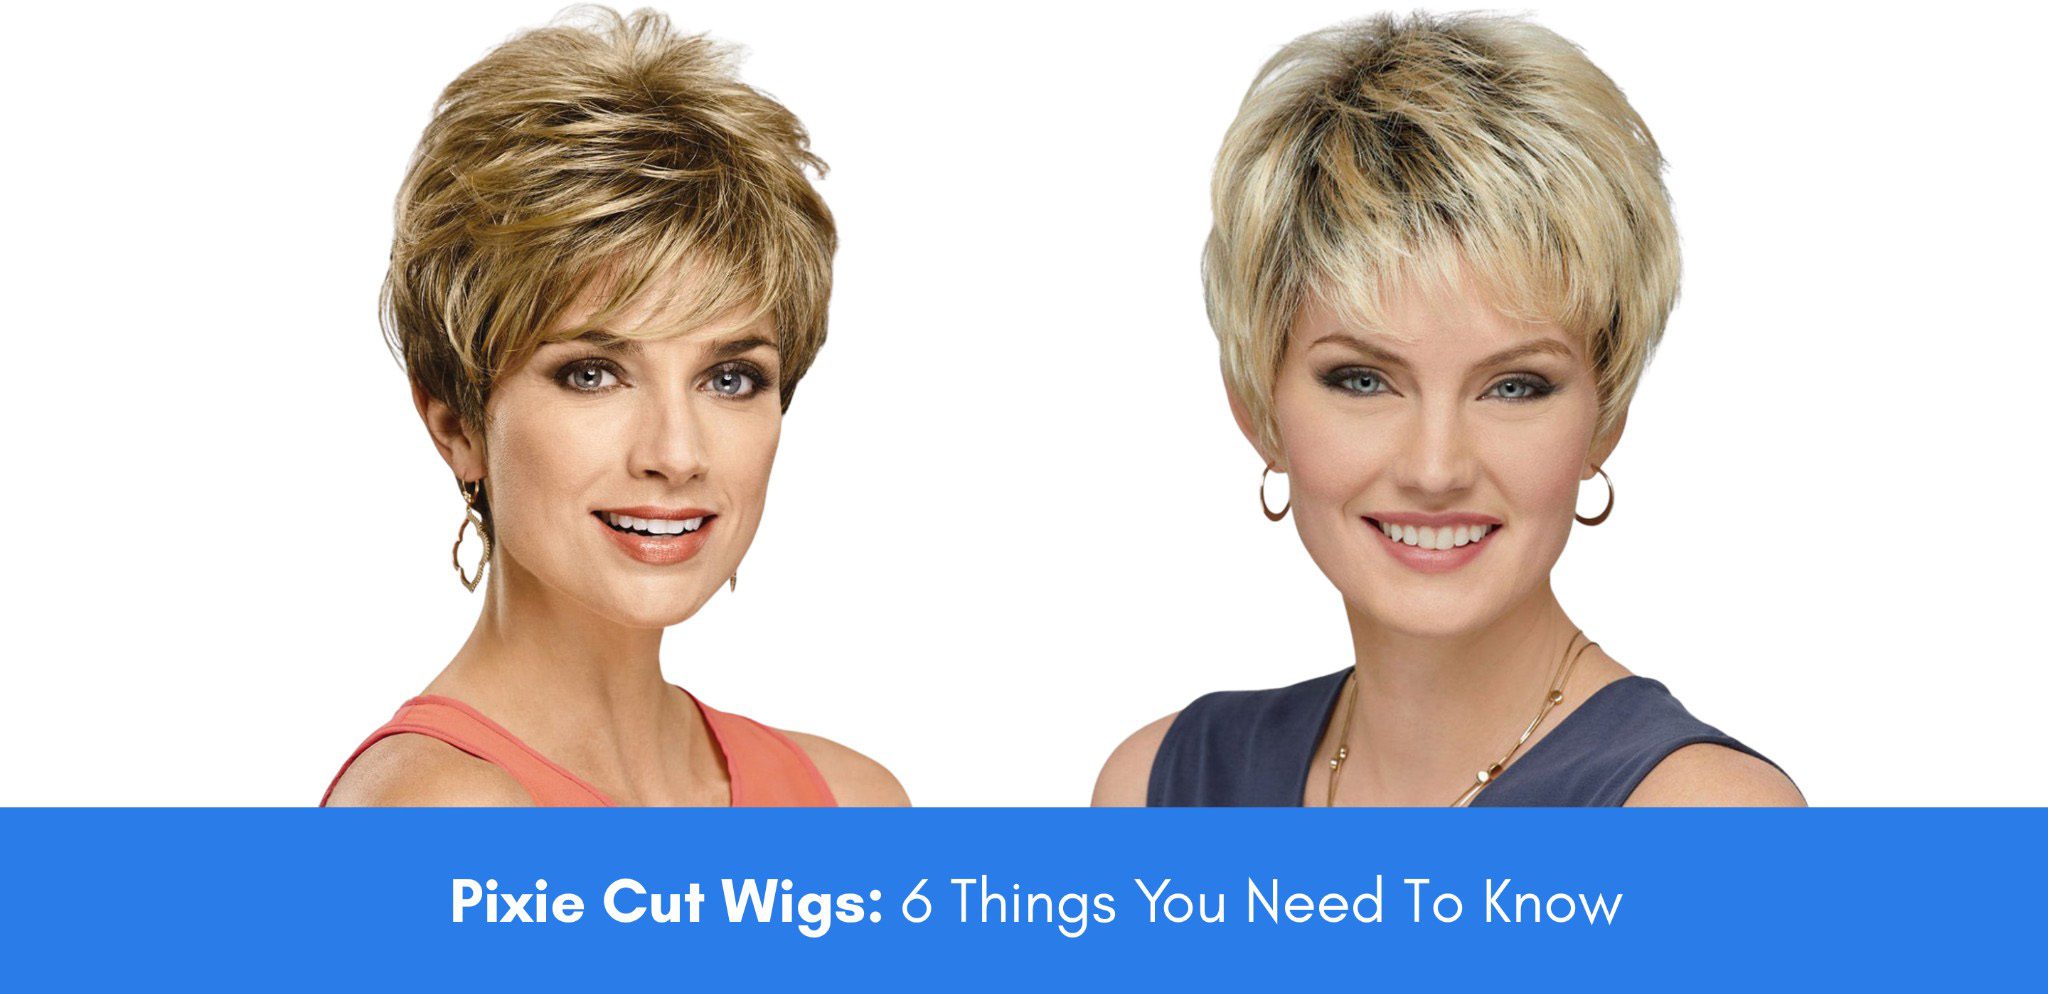 pixie cut wigs 6 things you need to know